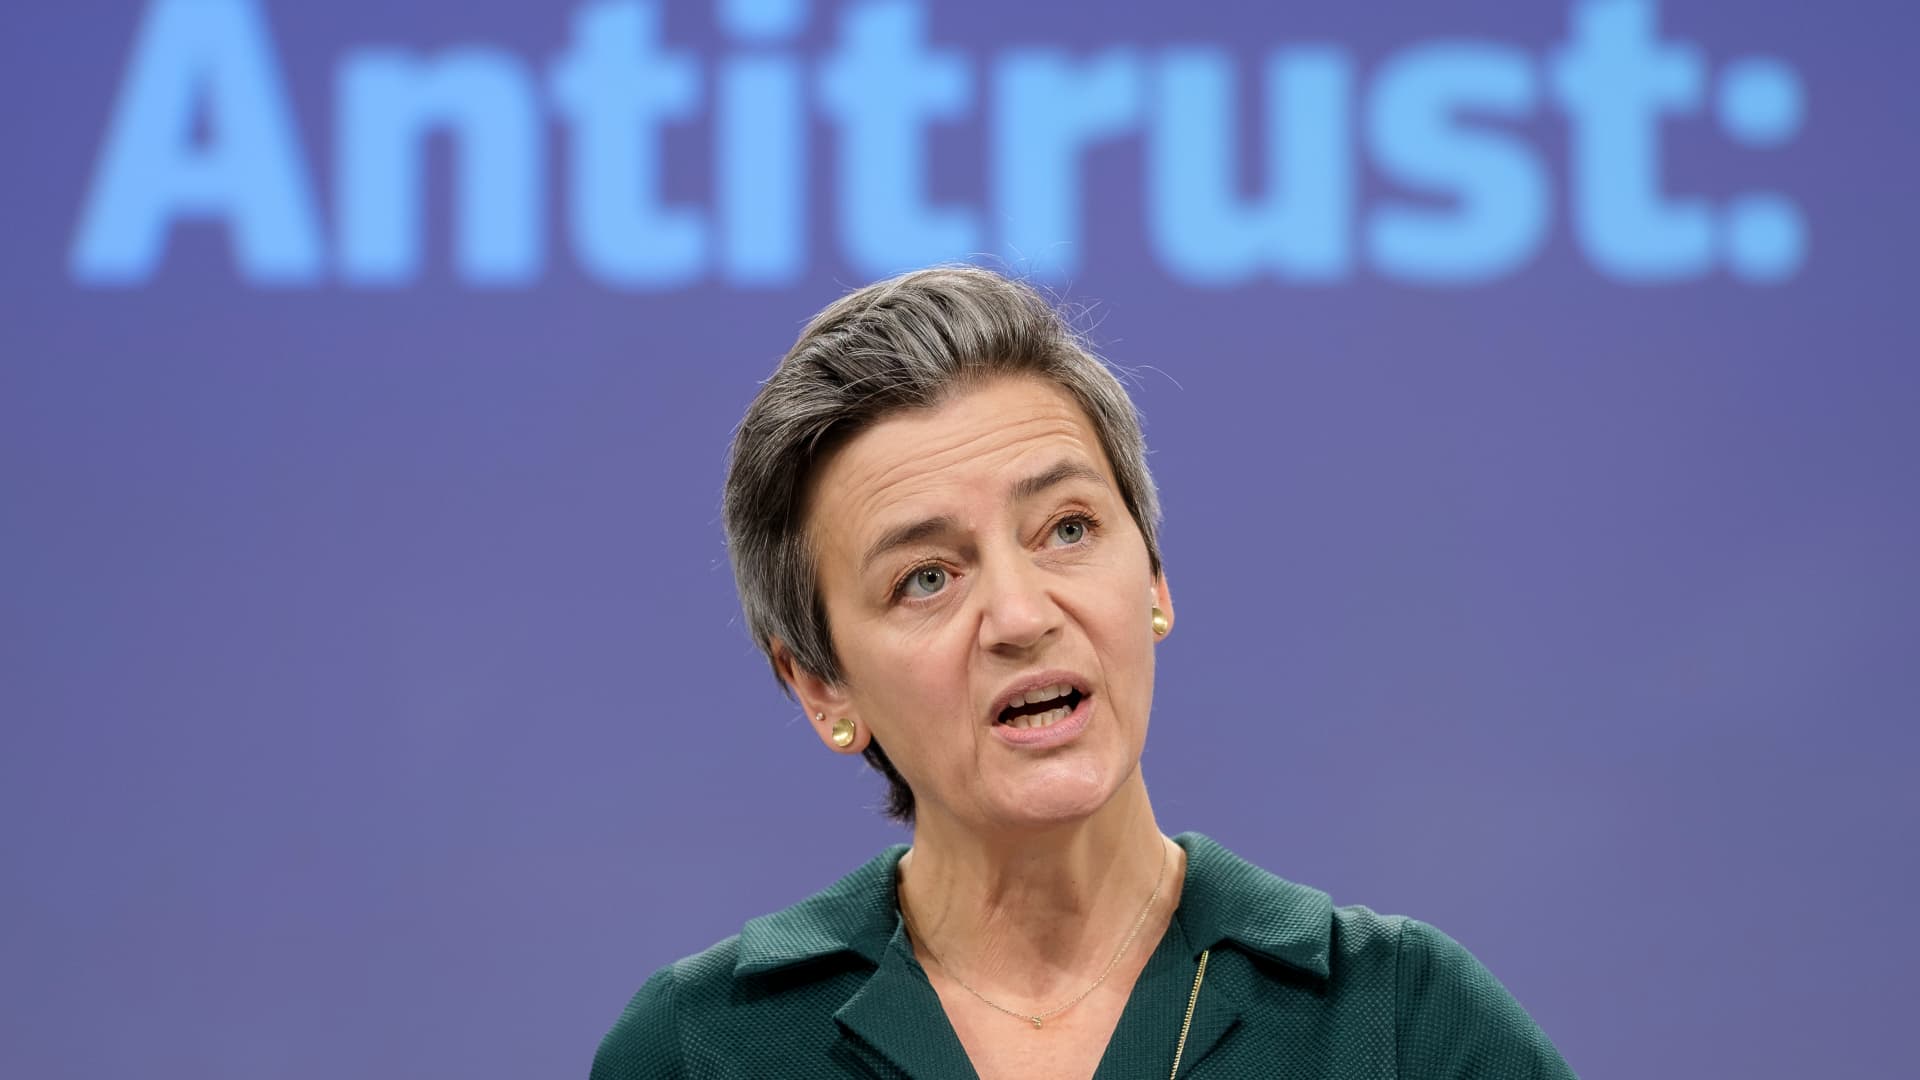 EU Commissioner for A Europe Fit for the Digital Age - Executive Vice President Margrethe Vestager is talking to media during a virtual press briefing in the Berlaymont, the EU Commission headquarter on November 26, 2020, in Brussels, Belgium.